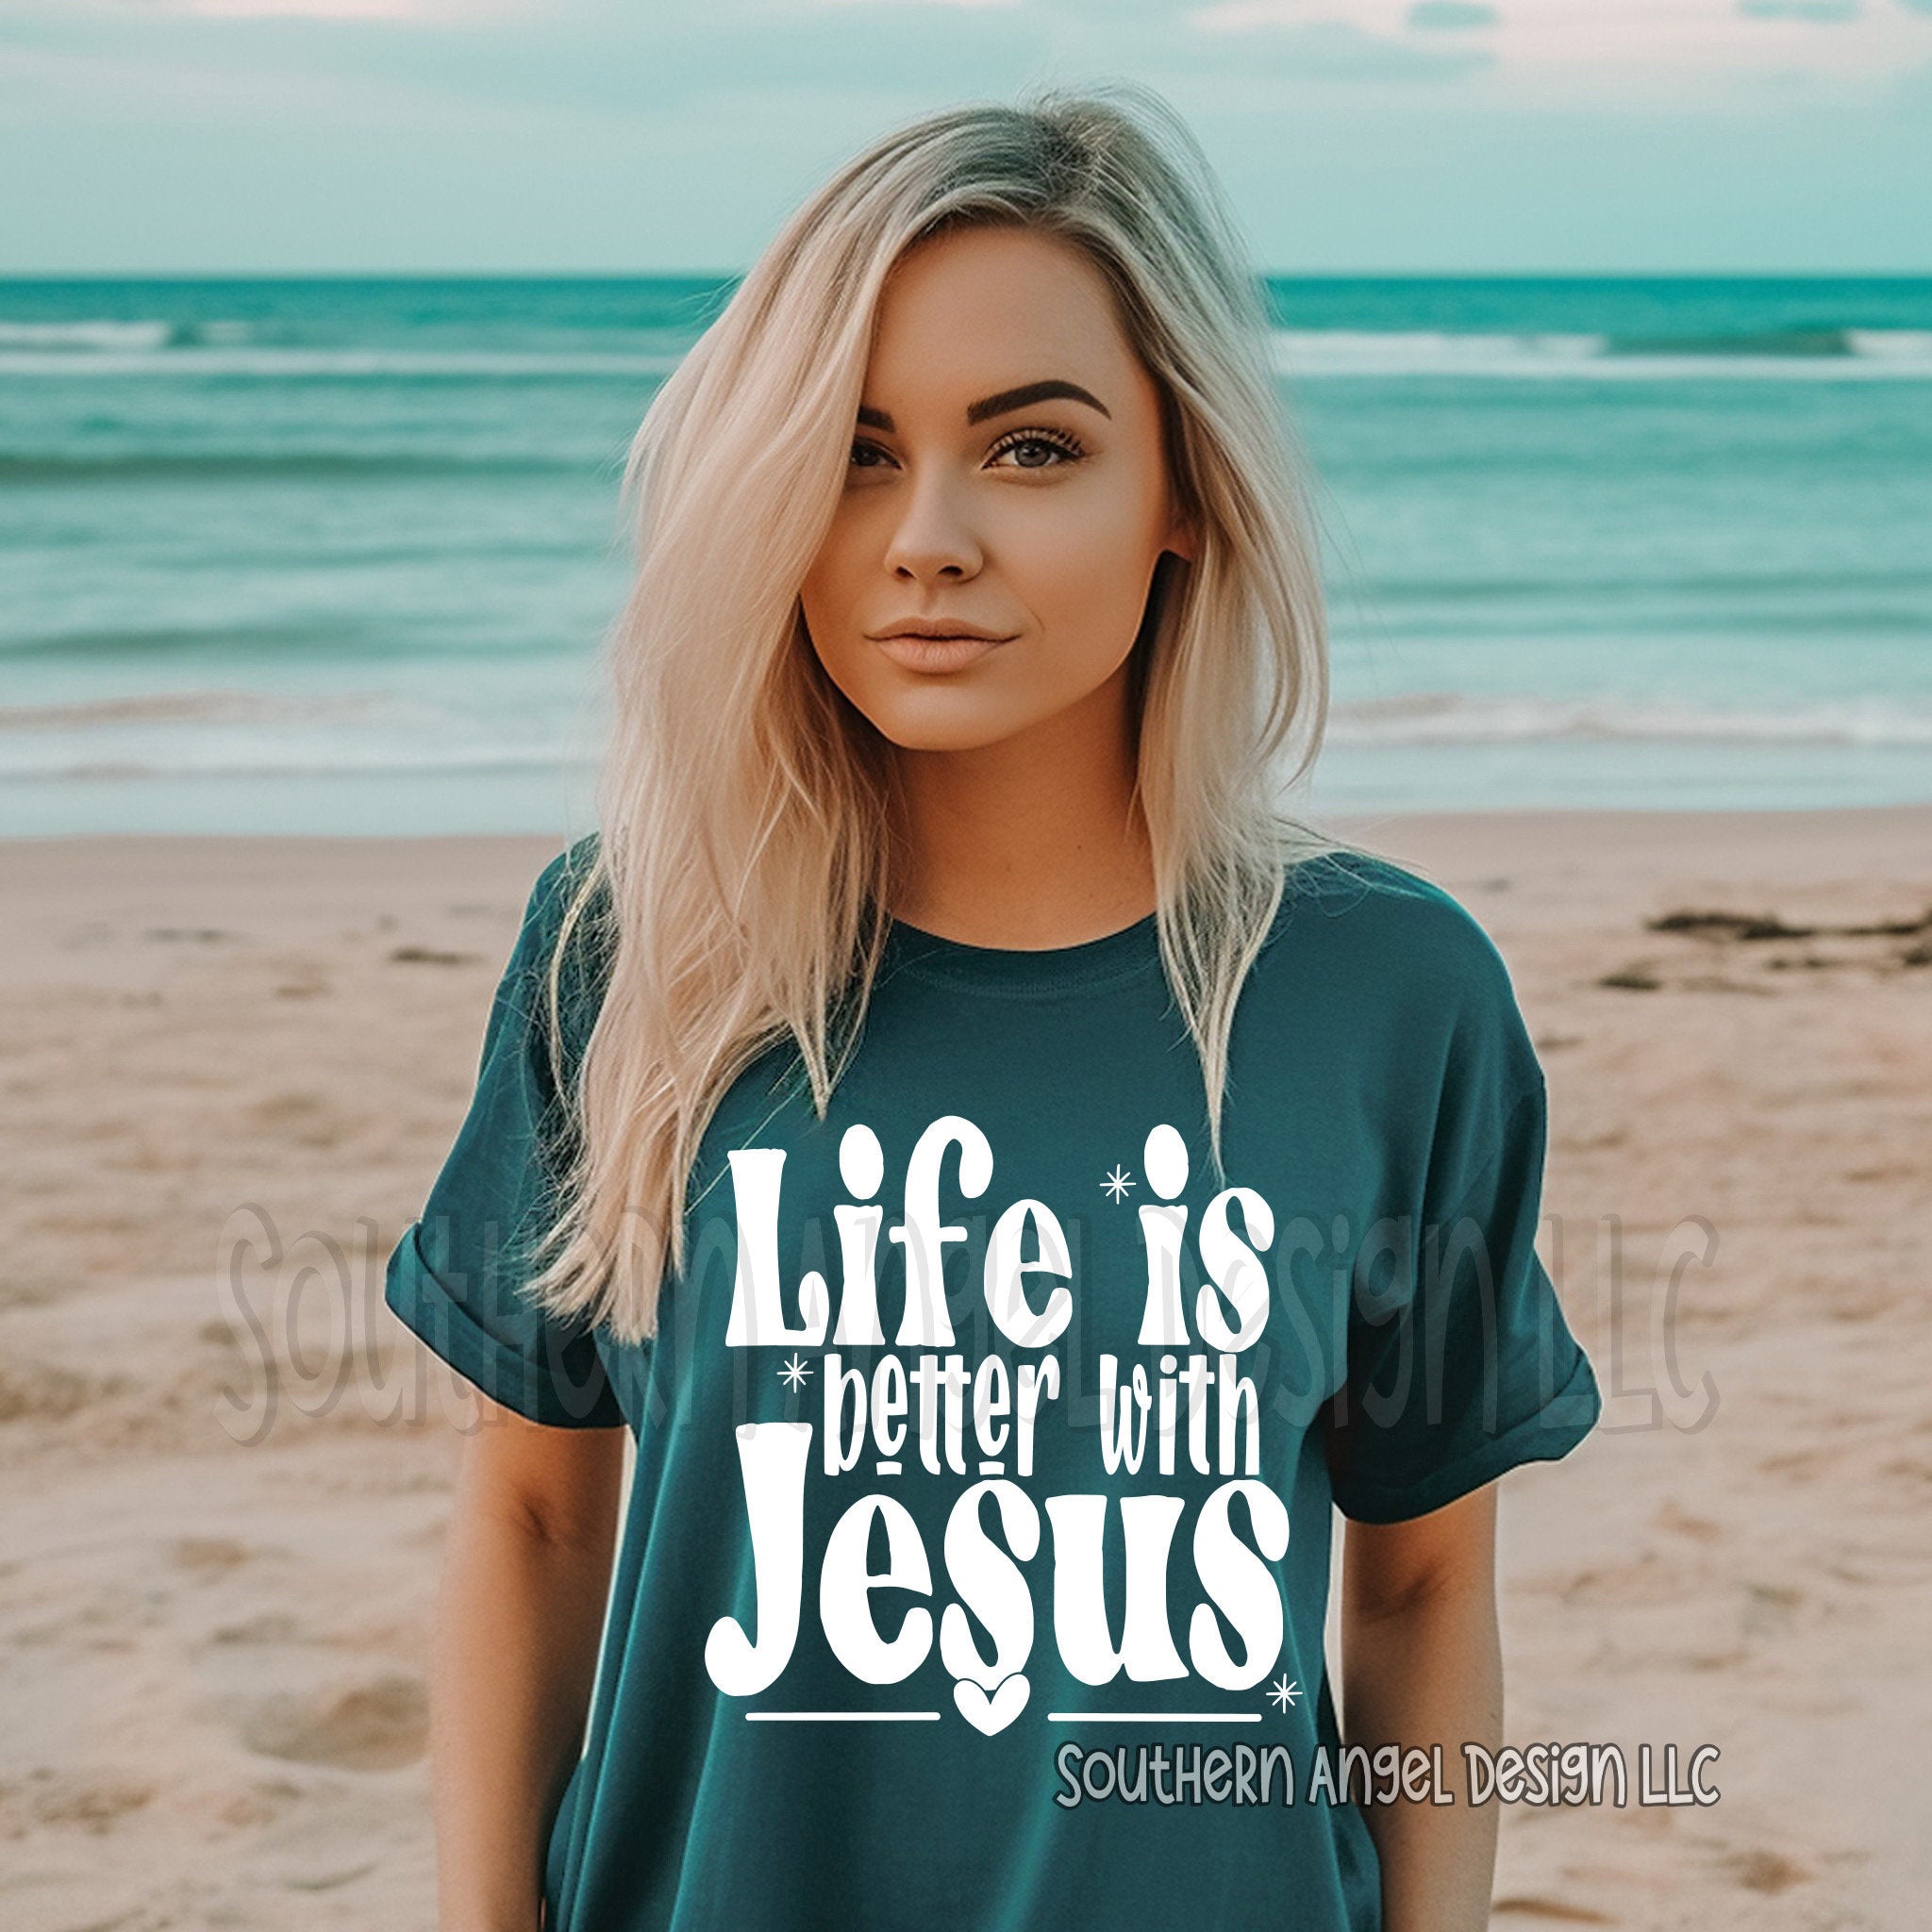 Life Is Better With Jesus shirt, John 3:16 shirt, Bible verse shirt, Religious shirt, Leave the judging to Jesus, Love like Jesus, Positive